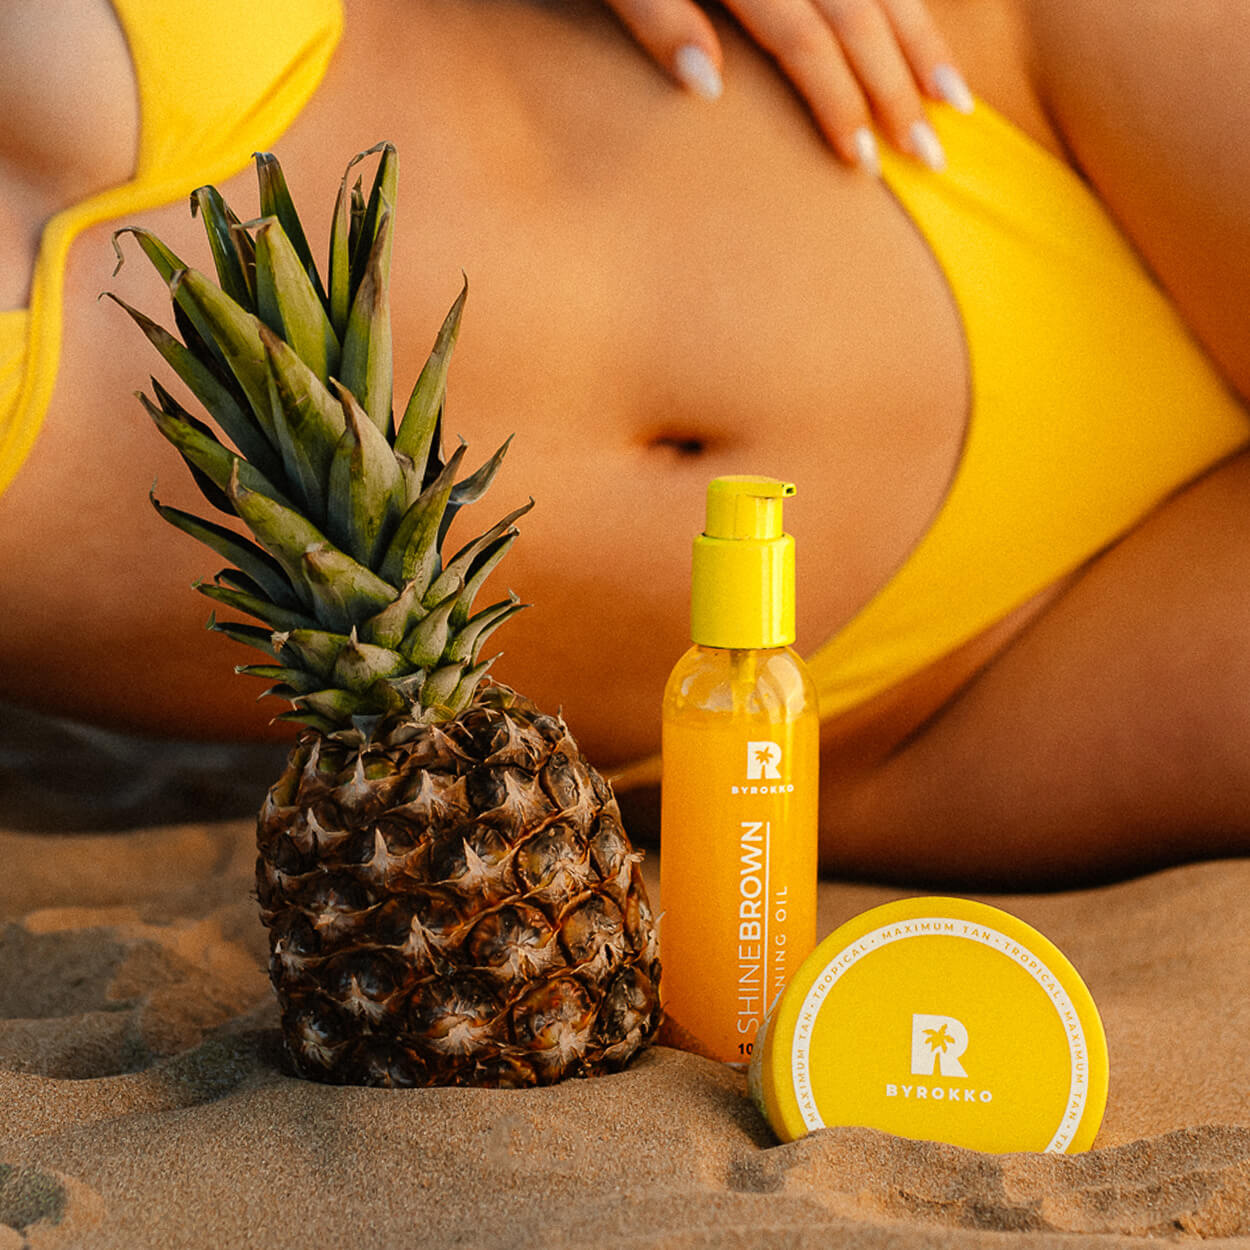 Byrokko Shine Brown Tropical tanning cream and tanning oil on the sand, beside a pineapple and a girl in a yellow bikini.